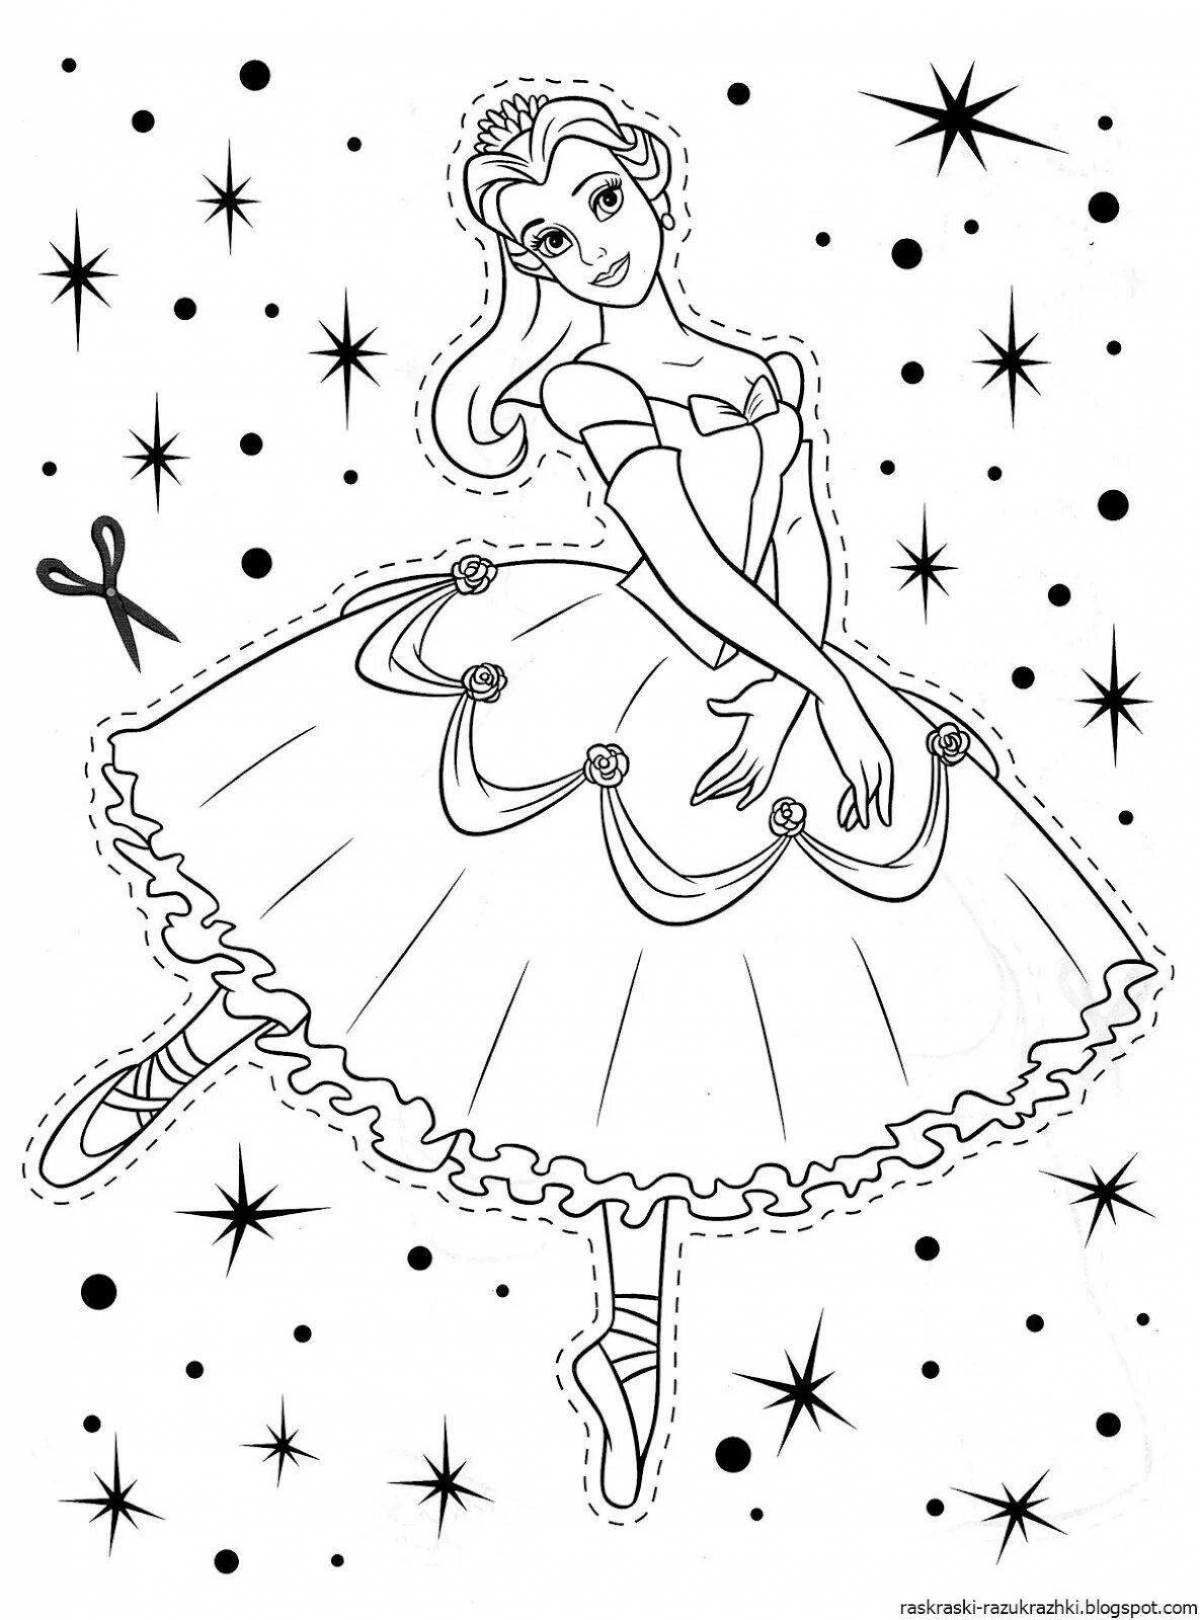 Magic princess coloring pages for girls 4-5 years old